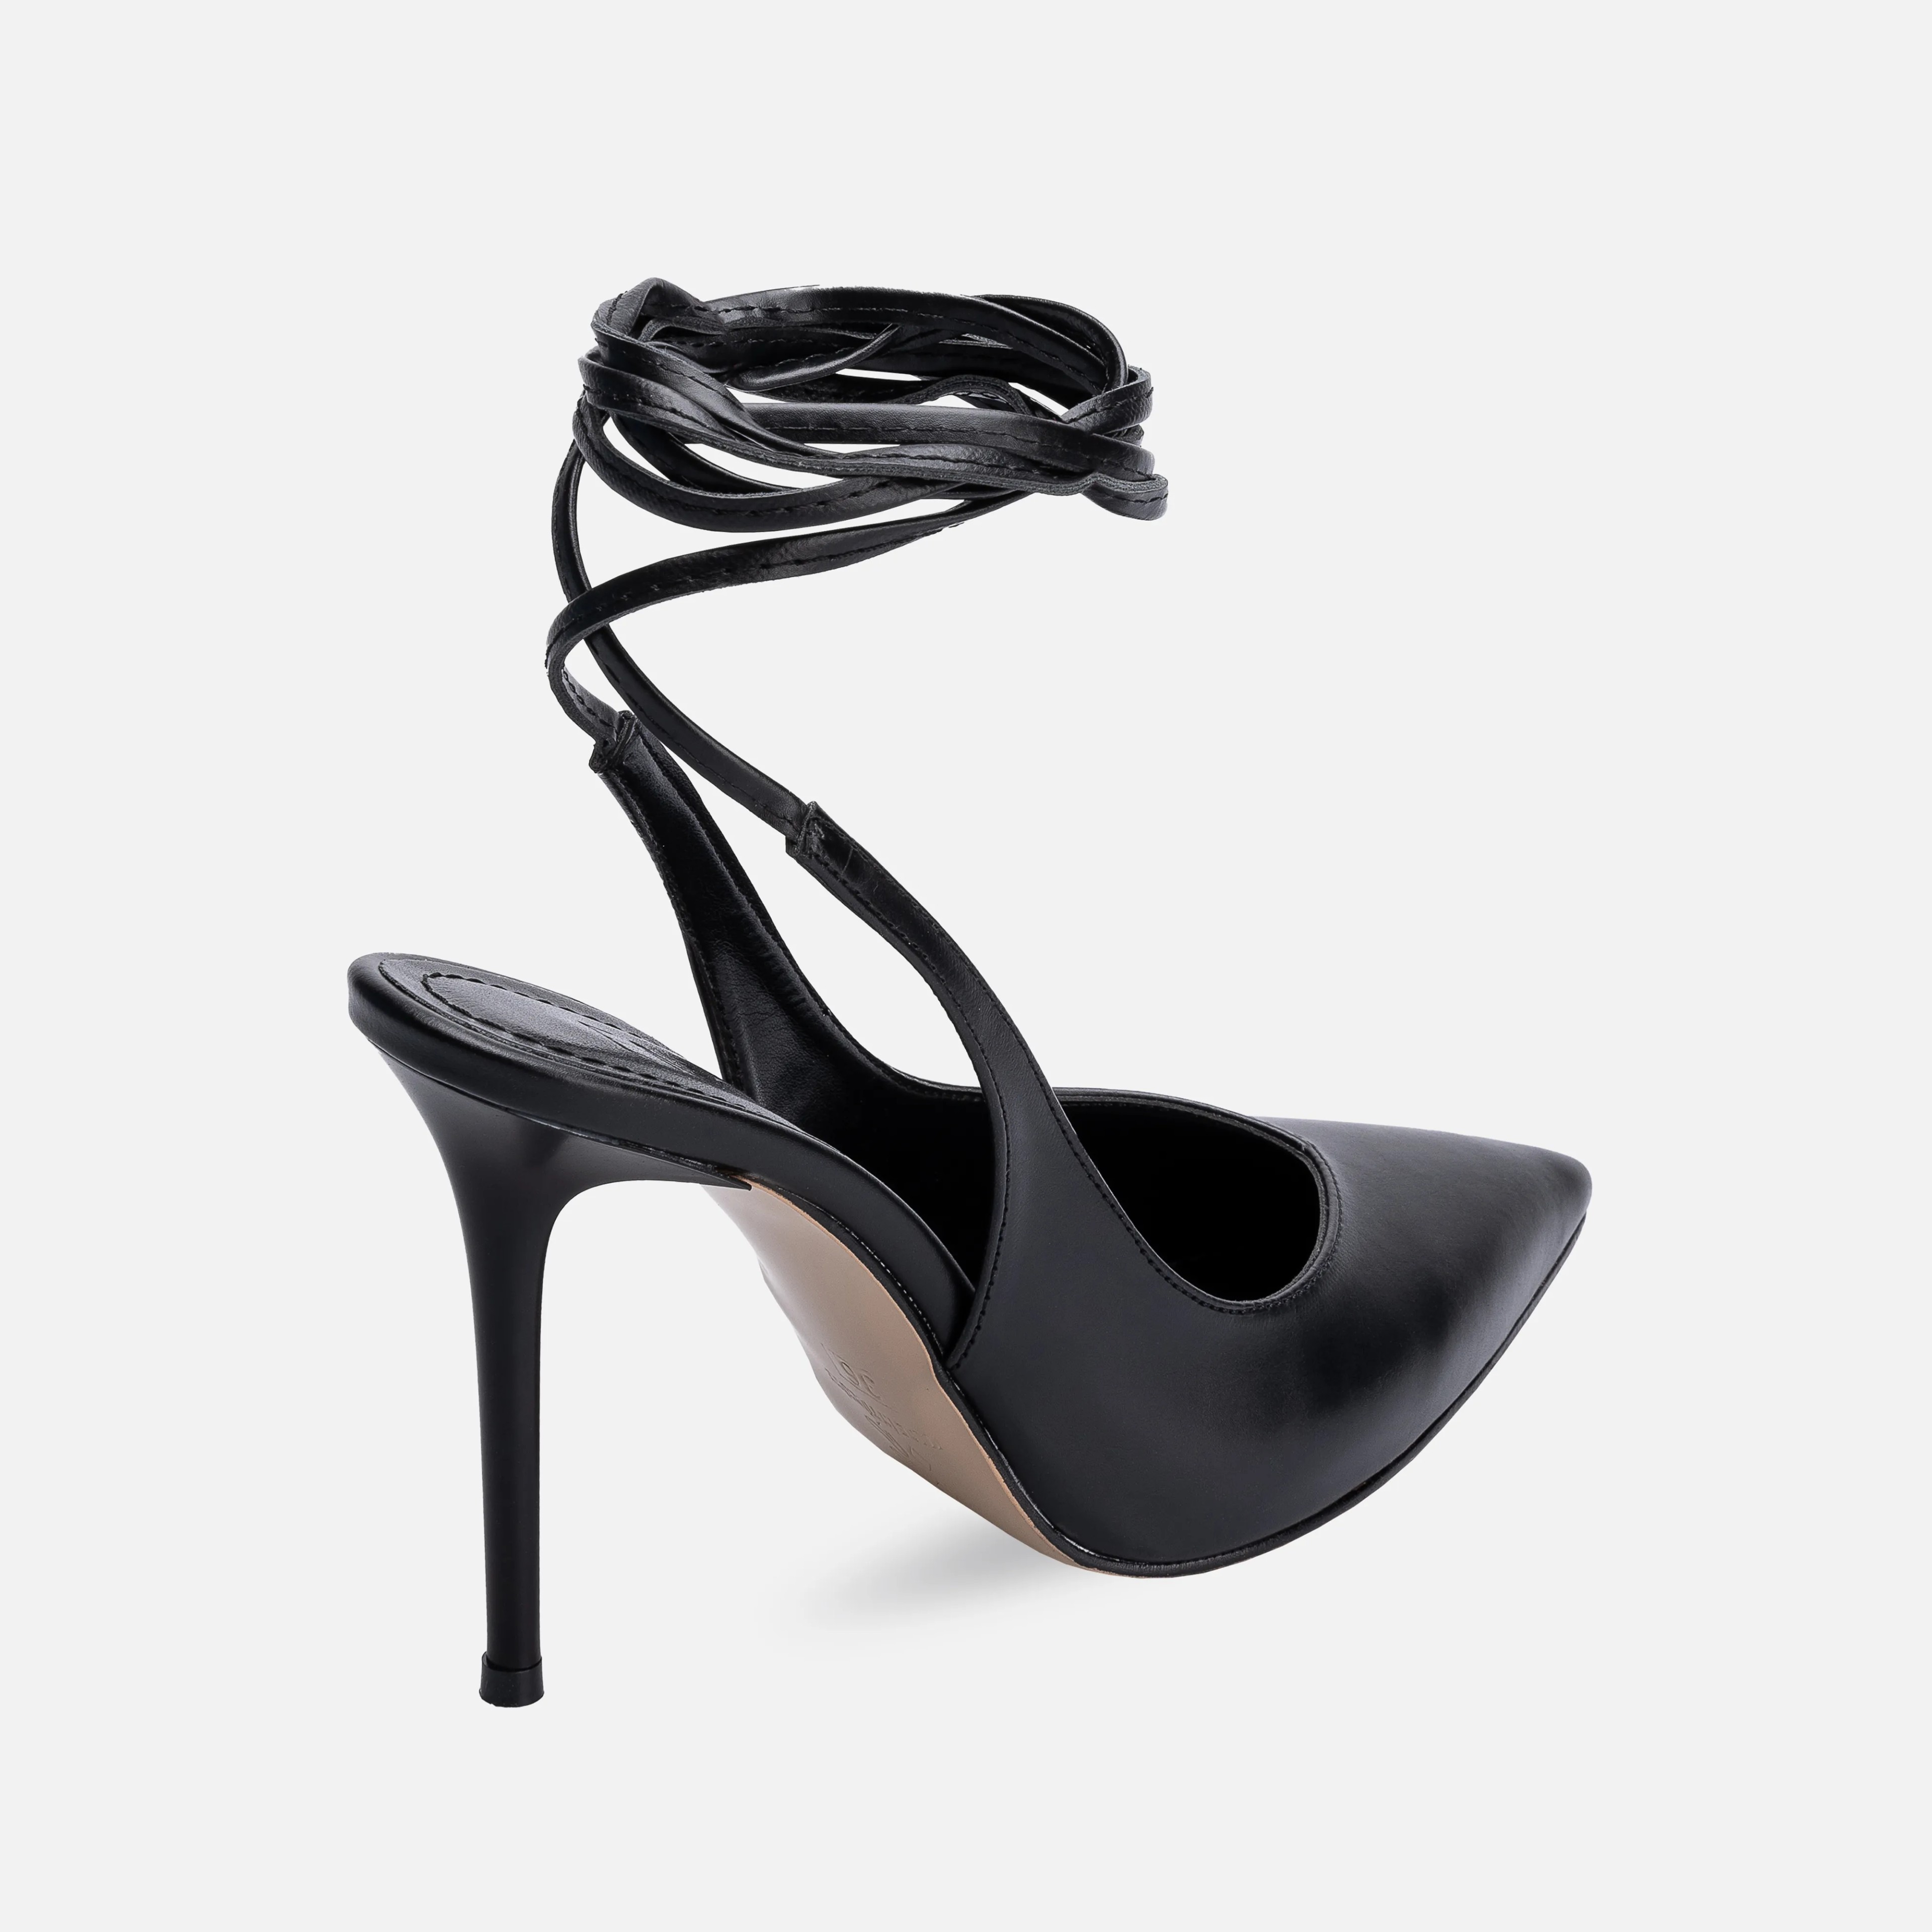 Lace-up Thin High-Heeled Pumps - Black